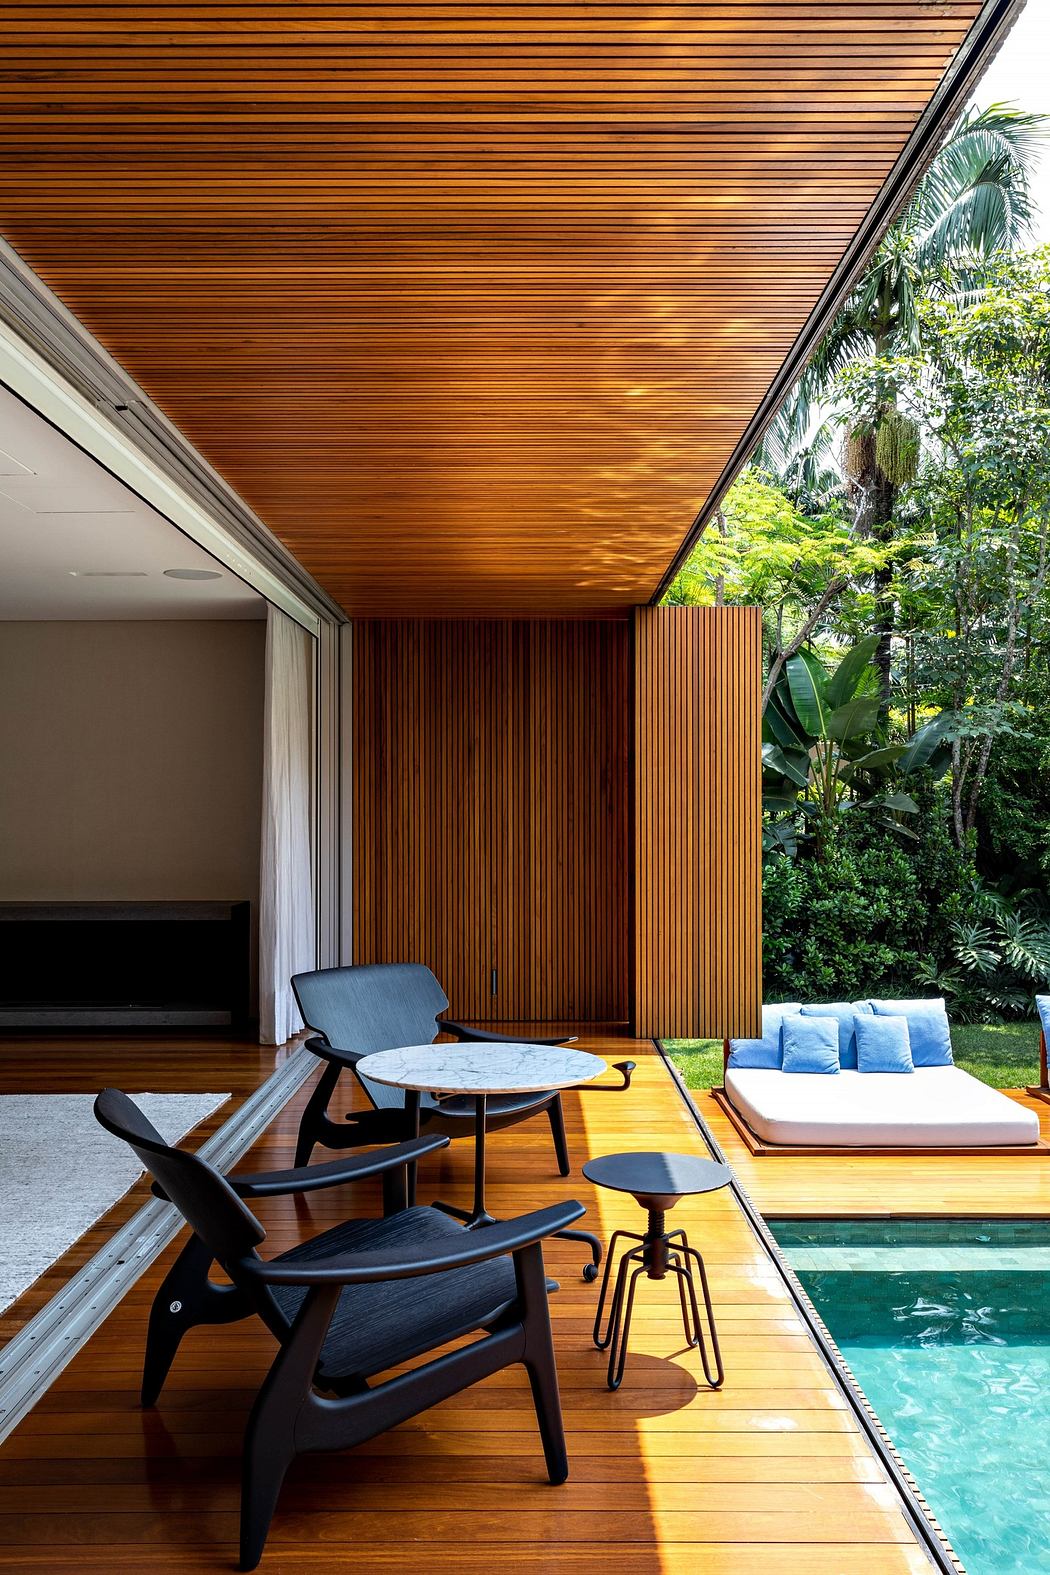 Contemporary patio with wooden ceiling, designer chairs, and poolside view.